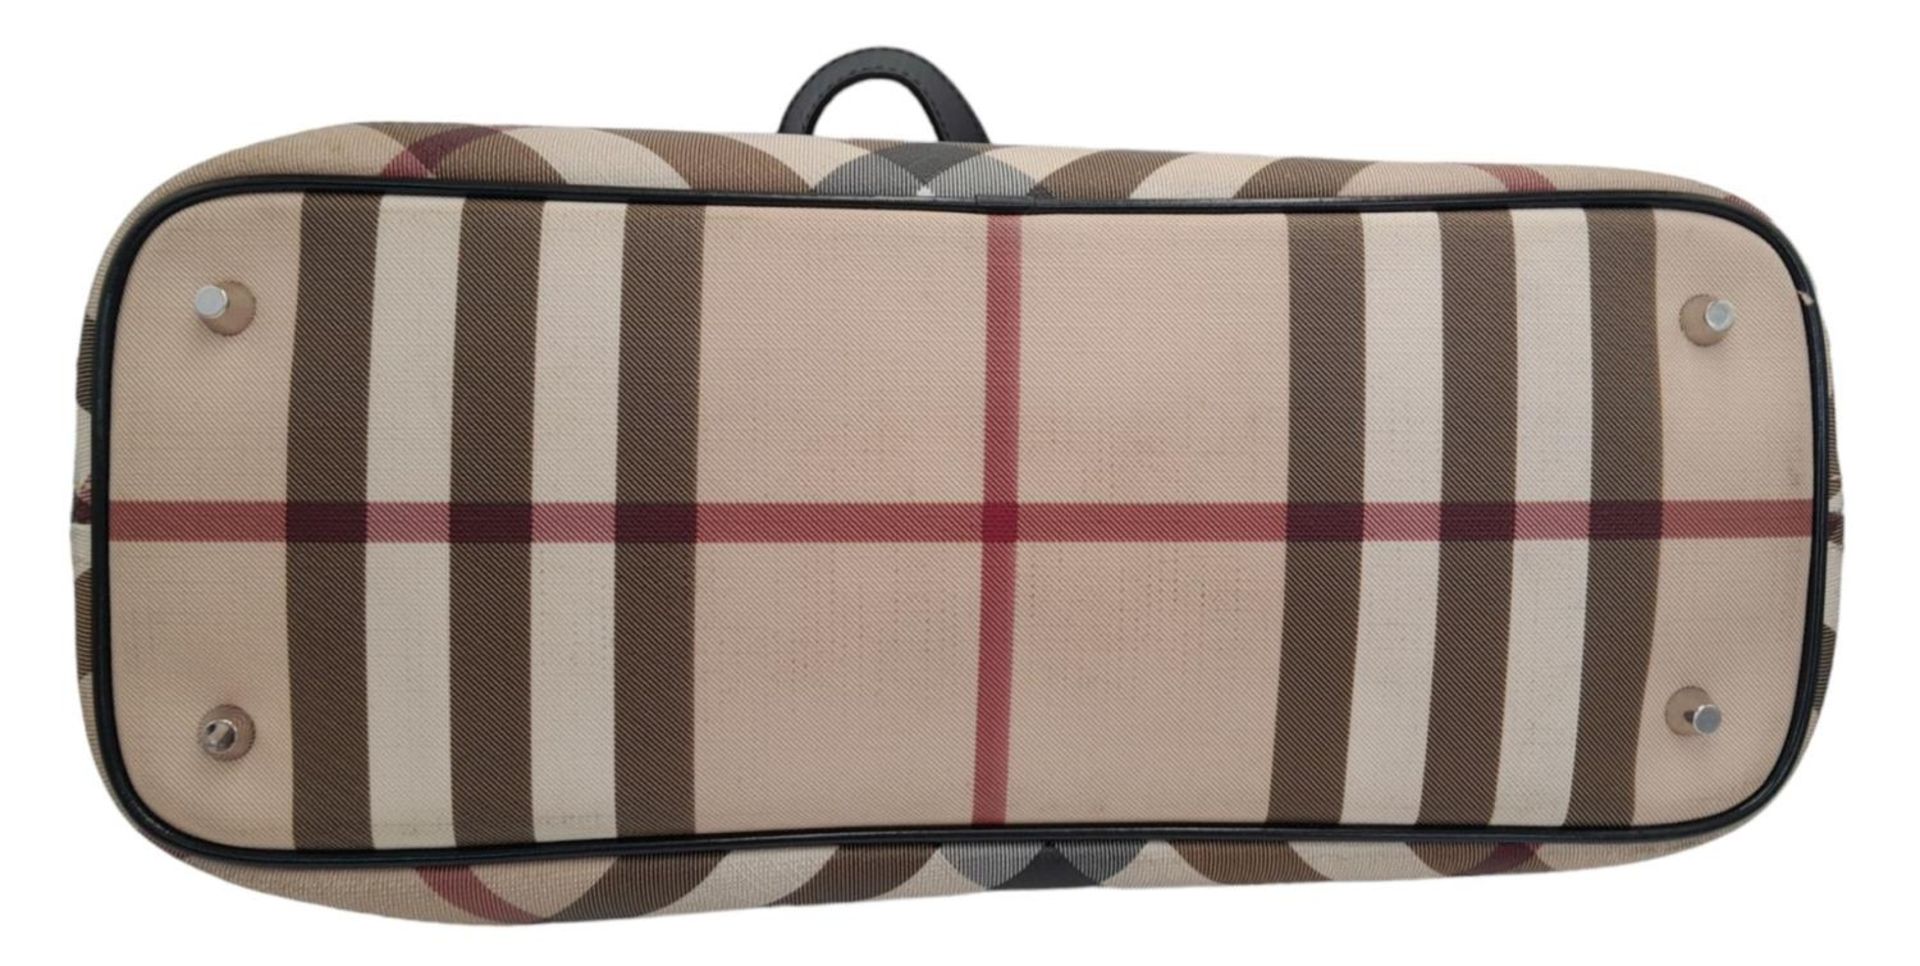 A Burberry Beige Check Nova Bag. Coated canvas exterior with leather trim, two leather straps, - Image 6 of 13